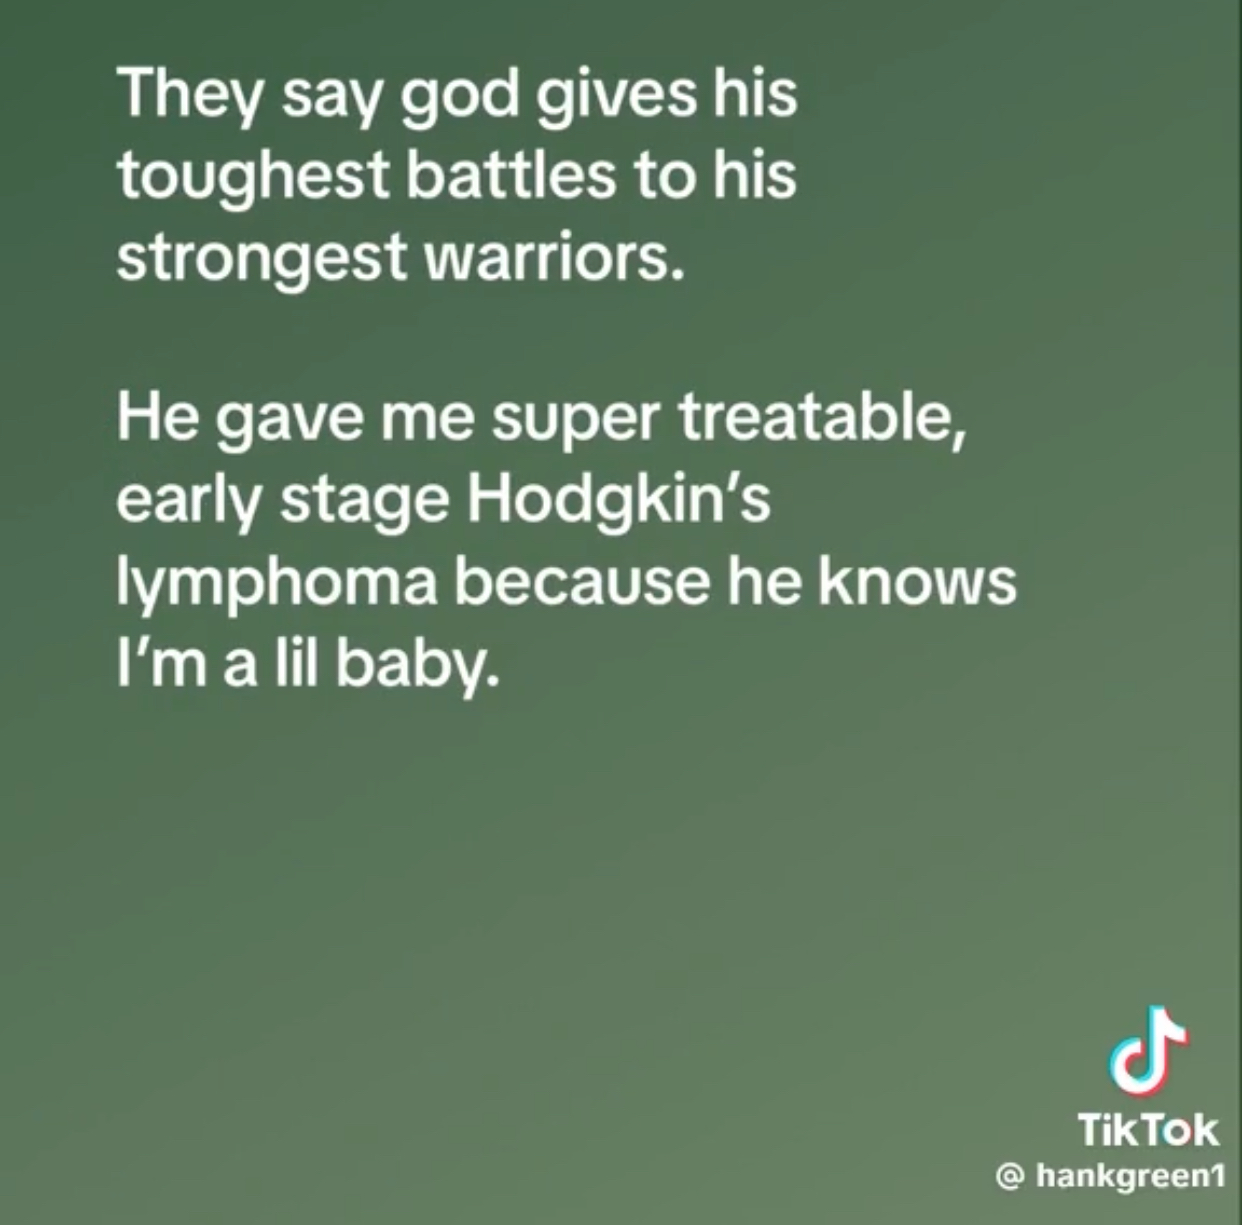 A screenshot of a TikTok post from @hankgreen1 saying 'They say god gives his toughest battles to his strongest warriors. He gave me super treatable, early stage Hodgkin's lymphoma because he knows I'm a lil baby.'